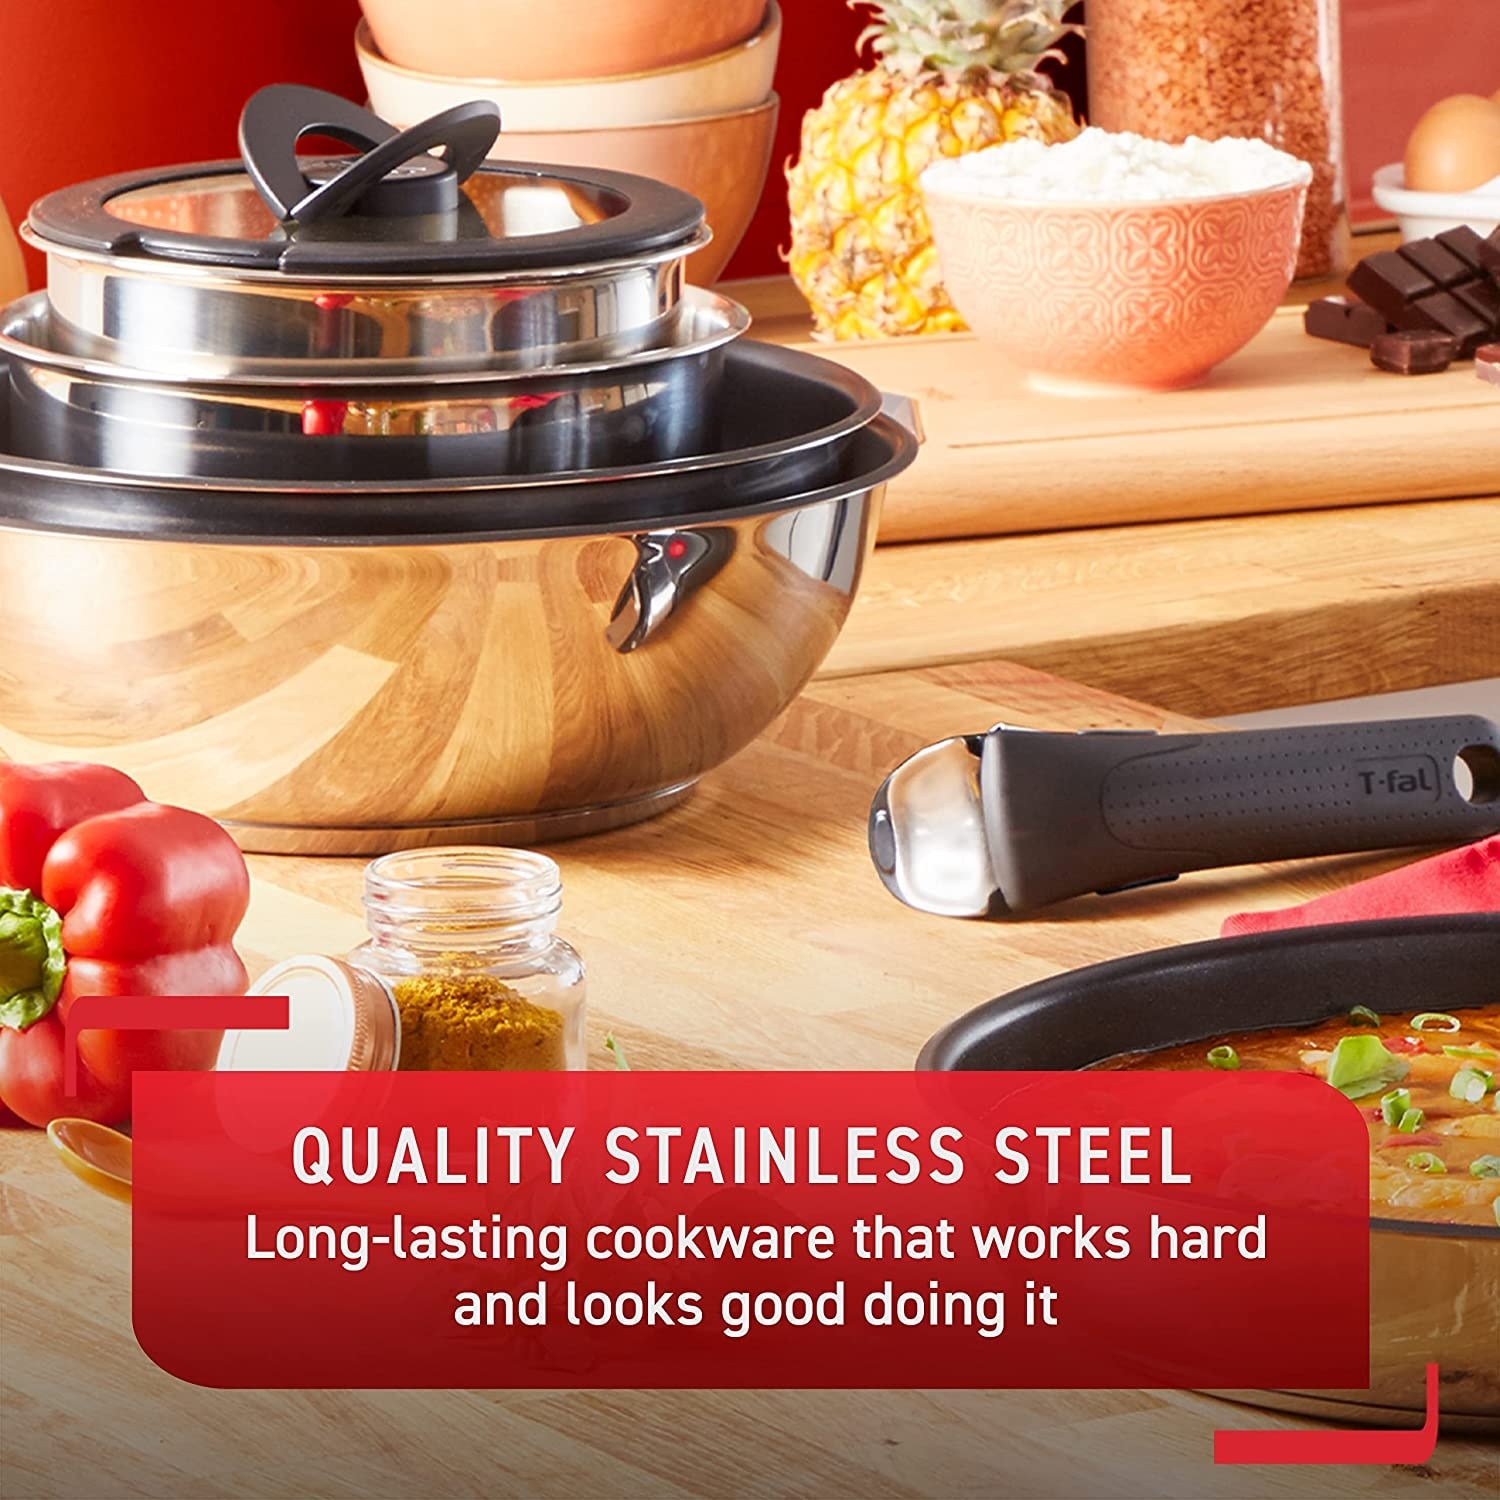 https://ak1.ostkcdn.com/images/products/is/images/direct/d1ce1837ef7c2ea65f65db01672803ef634dbff2/T-fal-Ingenio-Stainless-Steel-Cookware-Set-4-Piece-Induction-Stackable%2C-Removable-Handle-Pots-and-Pans%2C-Dishwasher-Safe-Silver.jpg